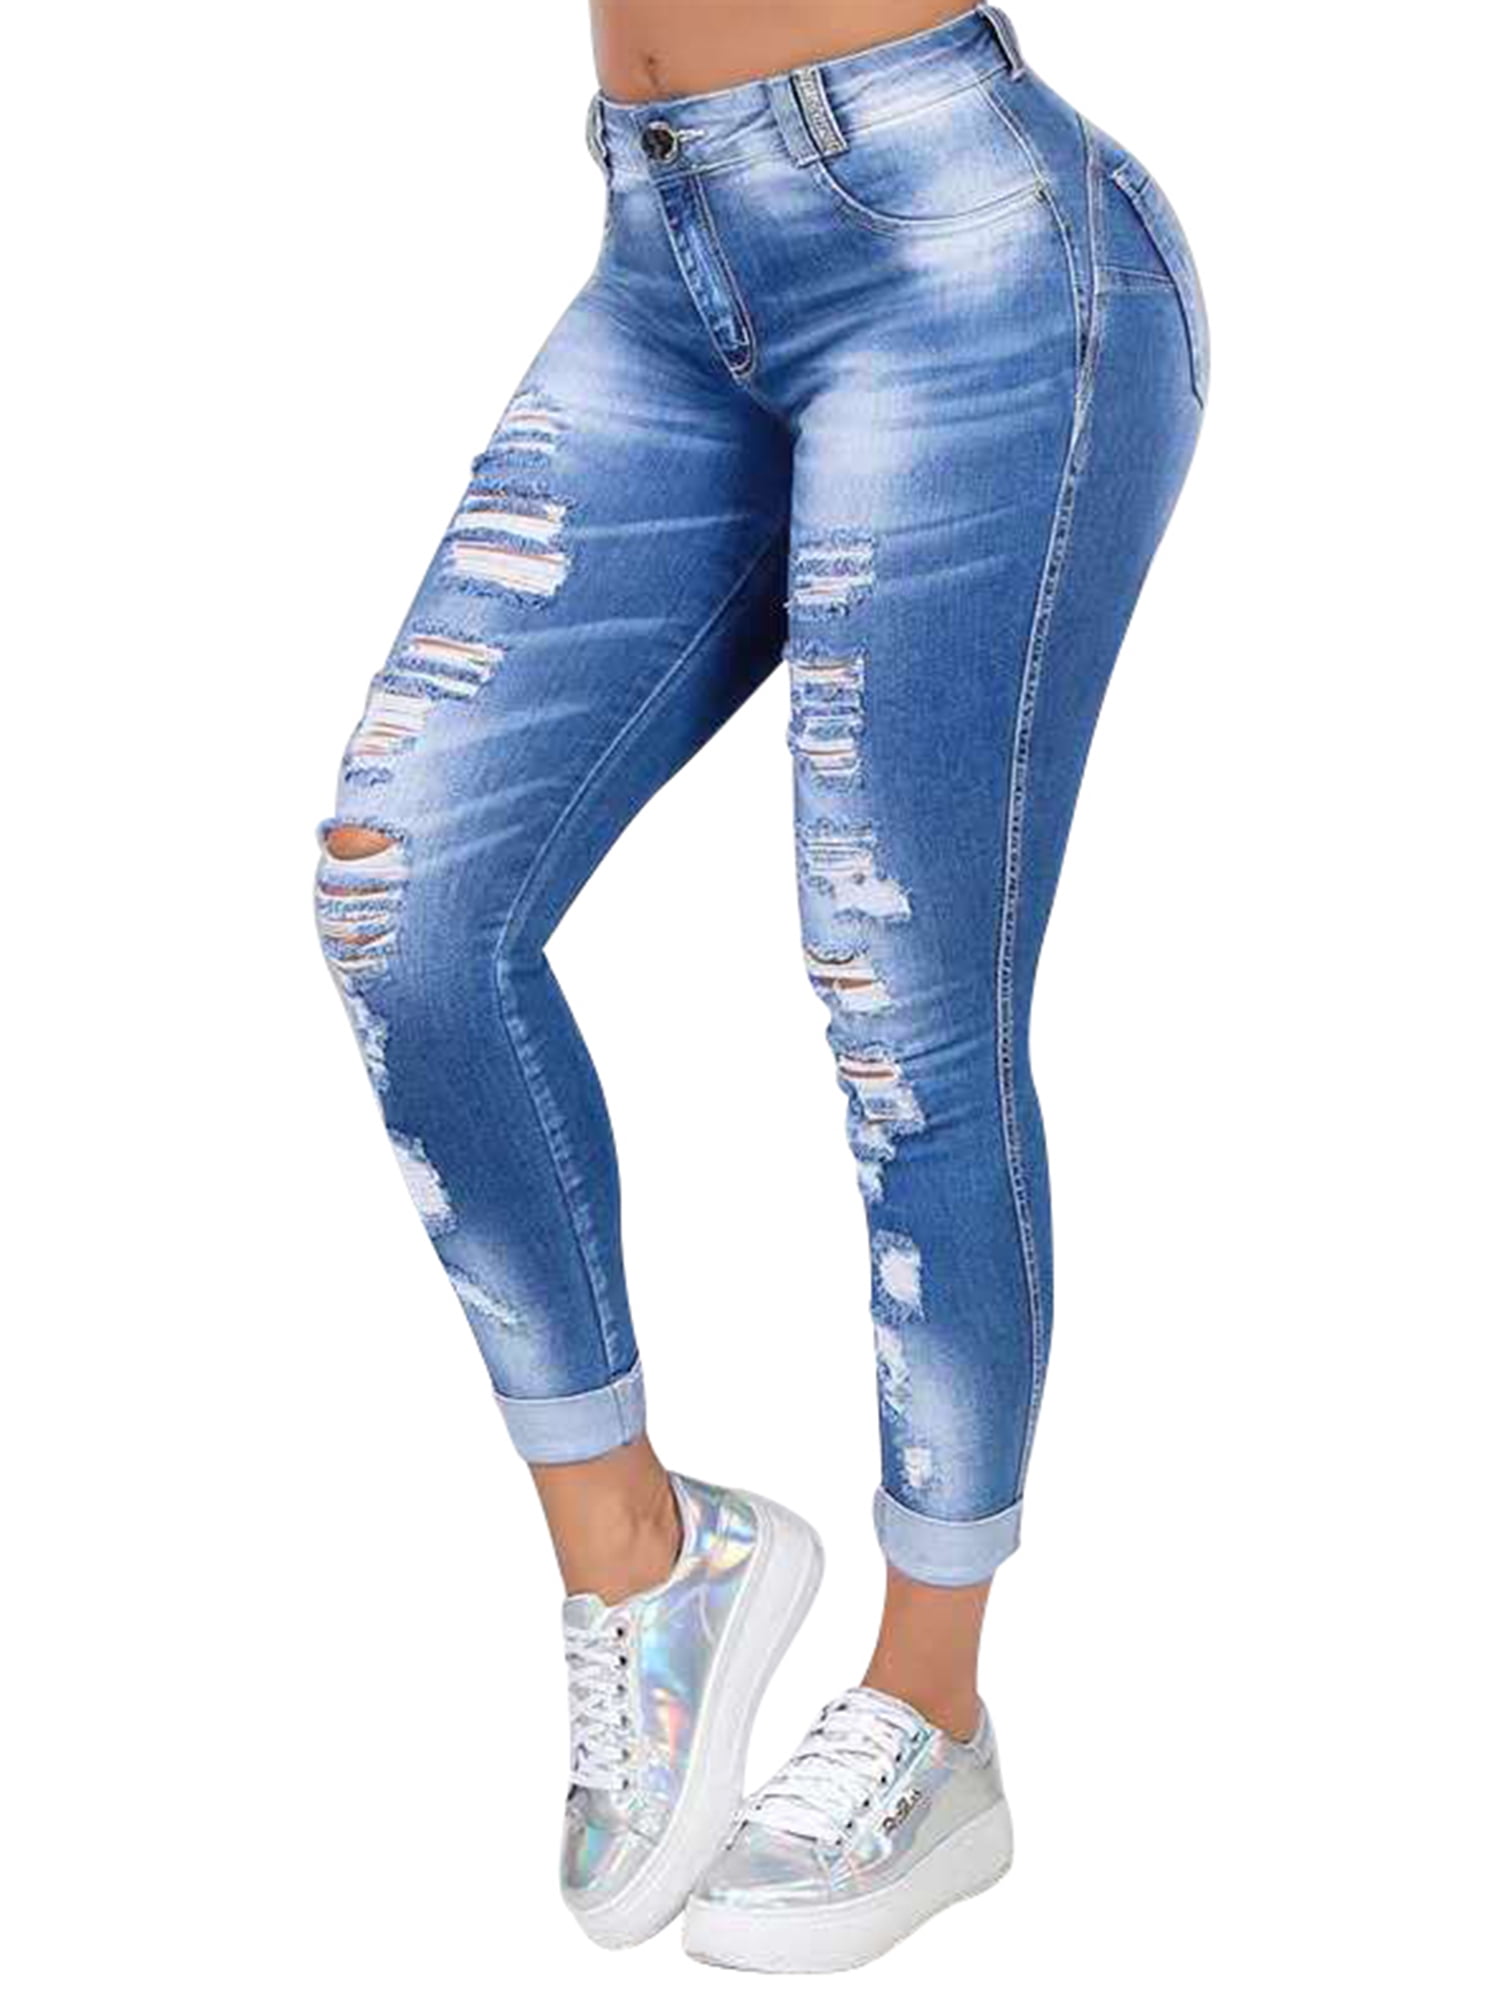 Womens Fashion Casual High Waist Ripped Jeans Leggings Trousers Lace Cut Out Skinny Stretch Denim Pencil Pants 